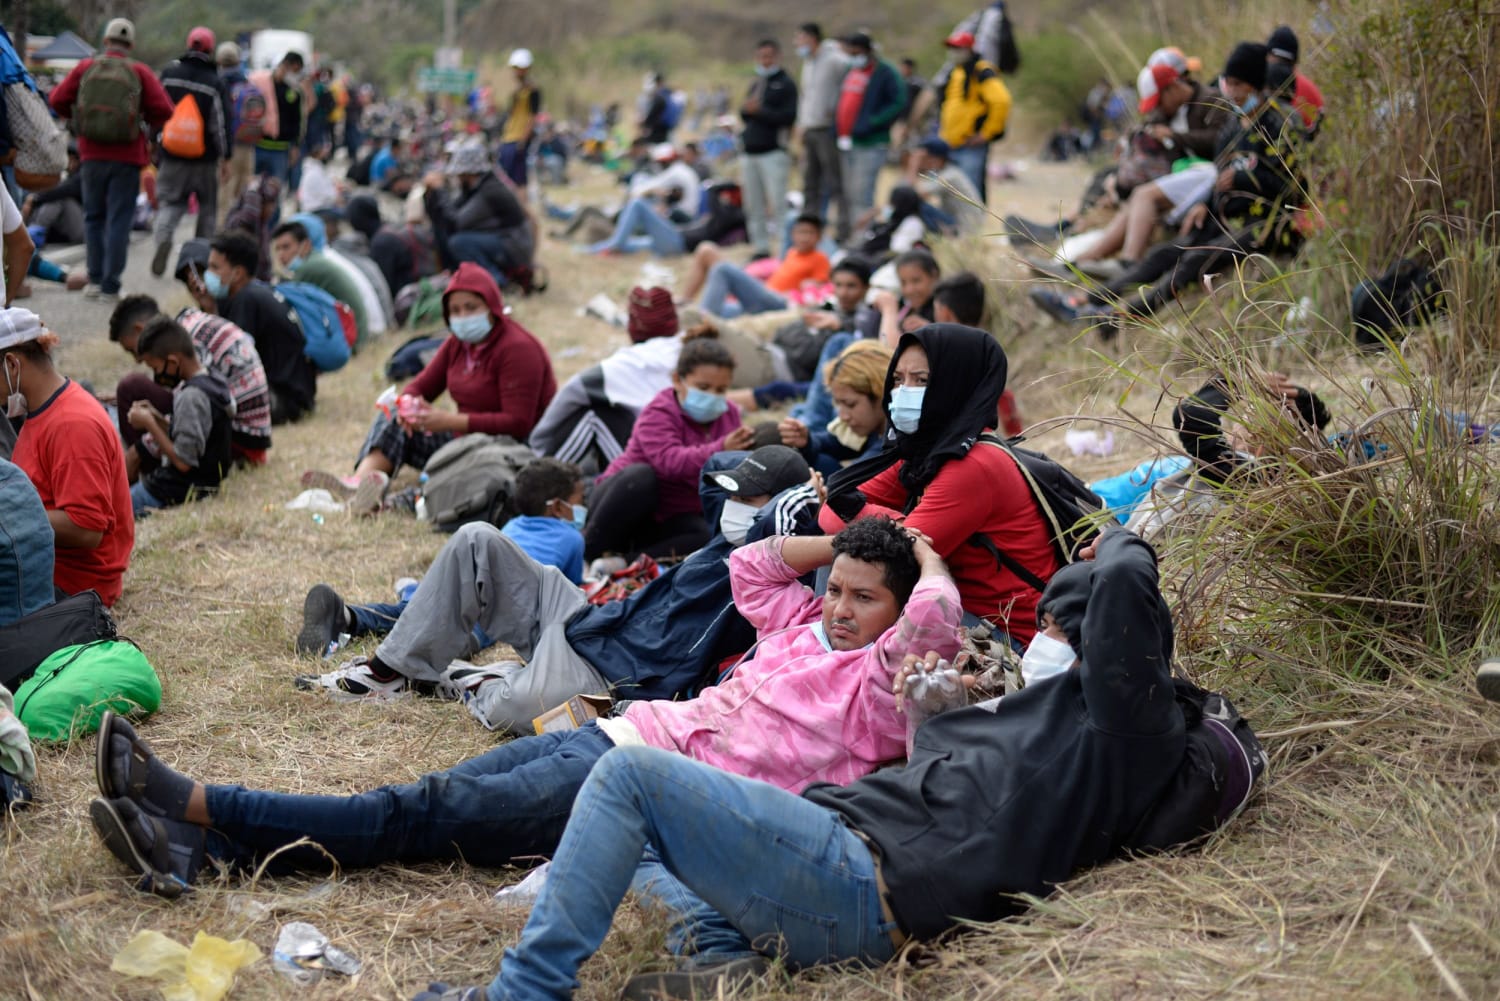 When Will Caravan Reach Us Border: The Latest Updates You Need to Know